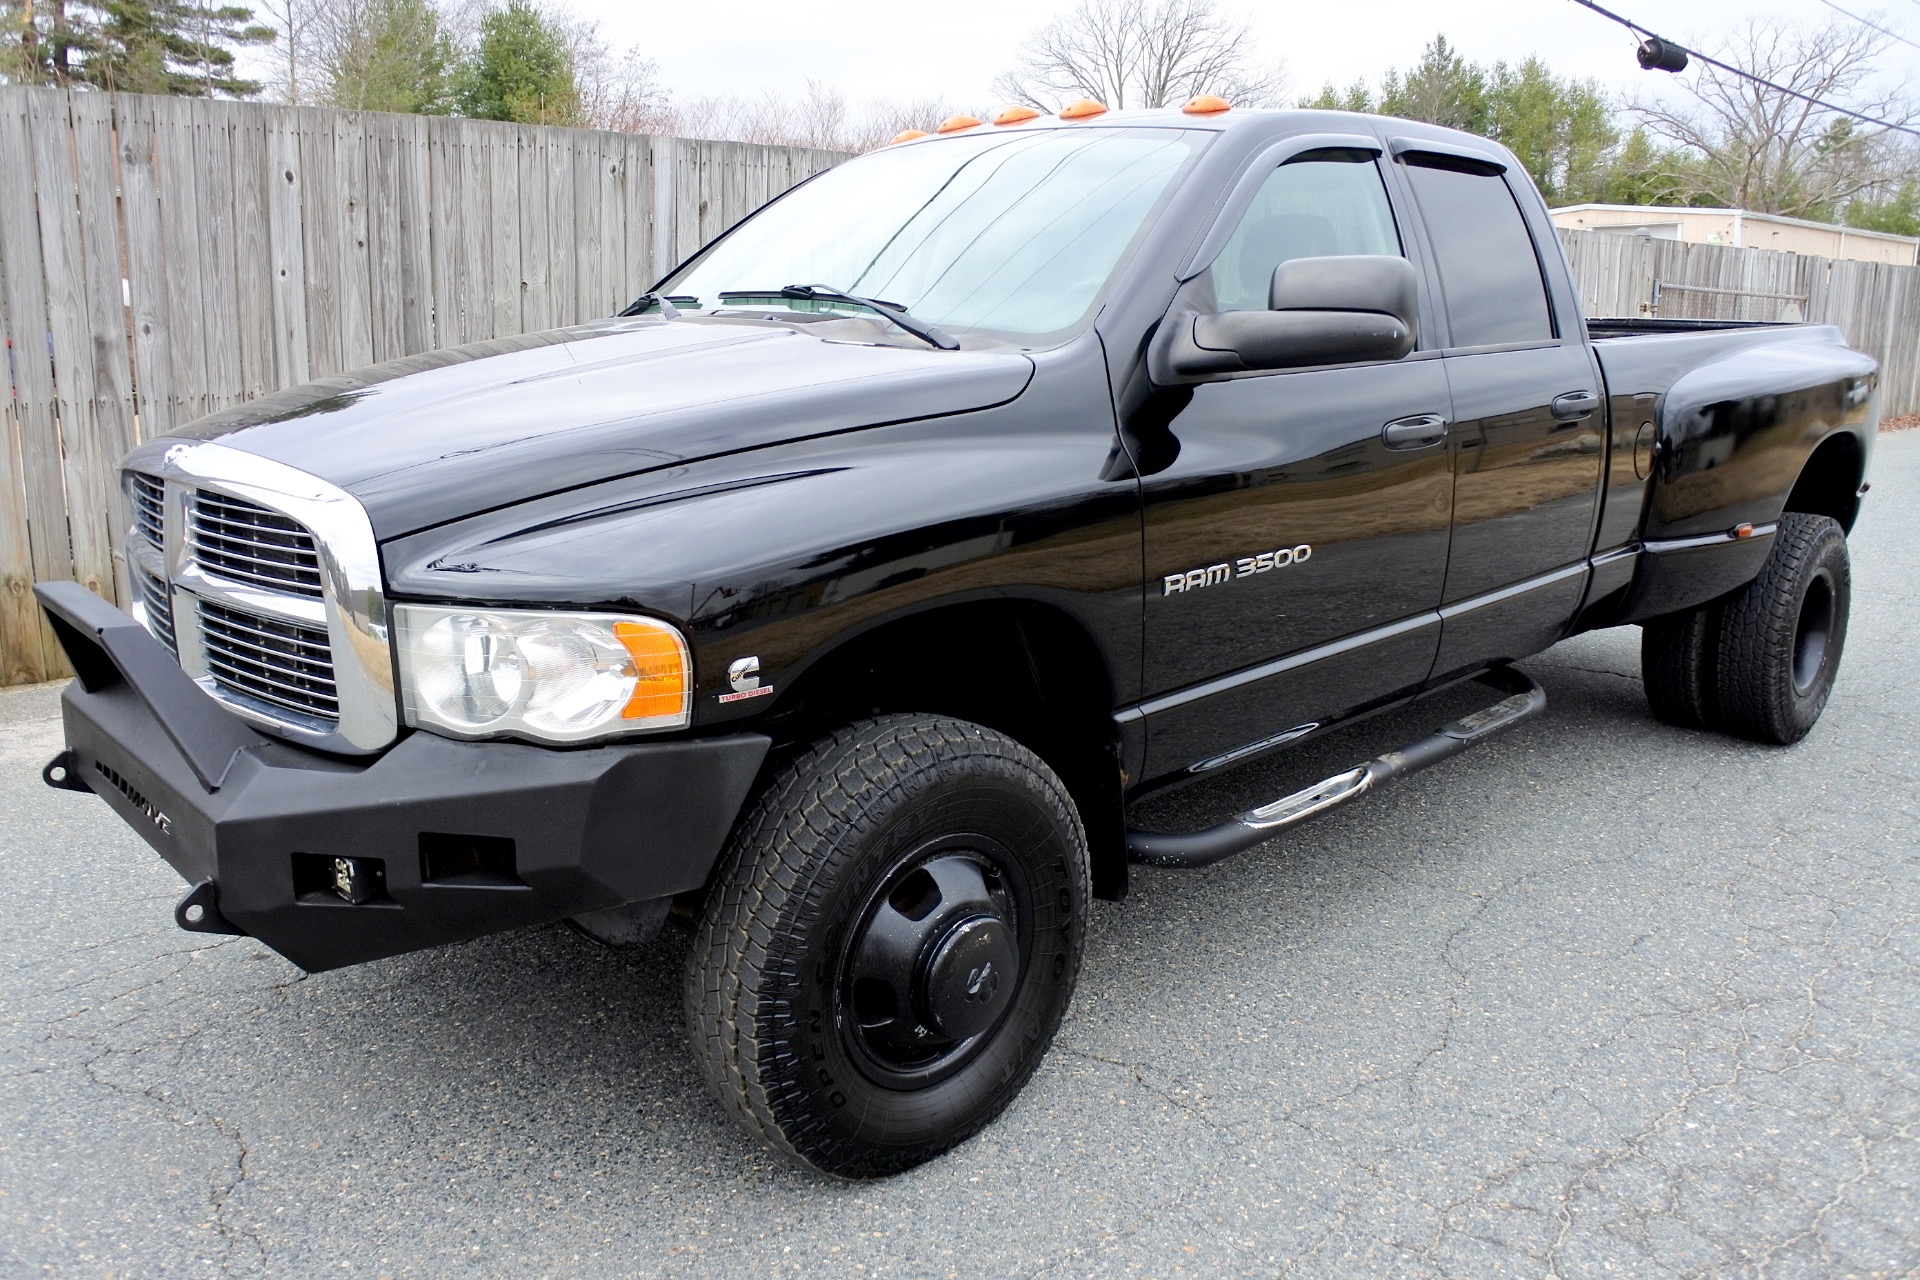 Used 2005 Dodge Ram 3500 4dr Quad Cab 160.5' WB DRW 4WD ST For Sale  ($19,900) | Metro West Motorcars LLC Stock #822580